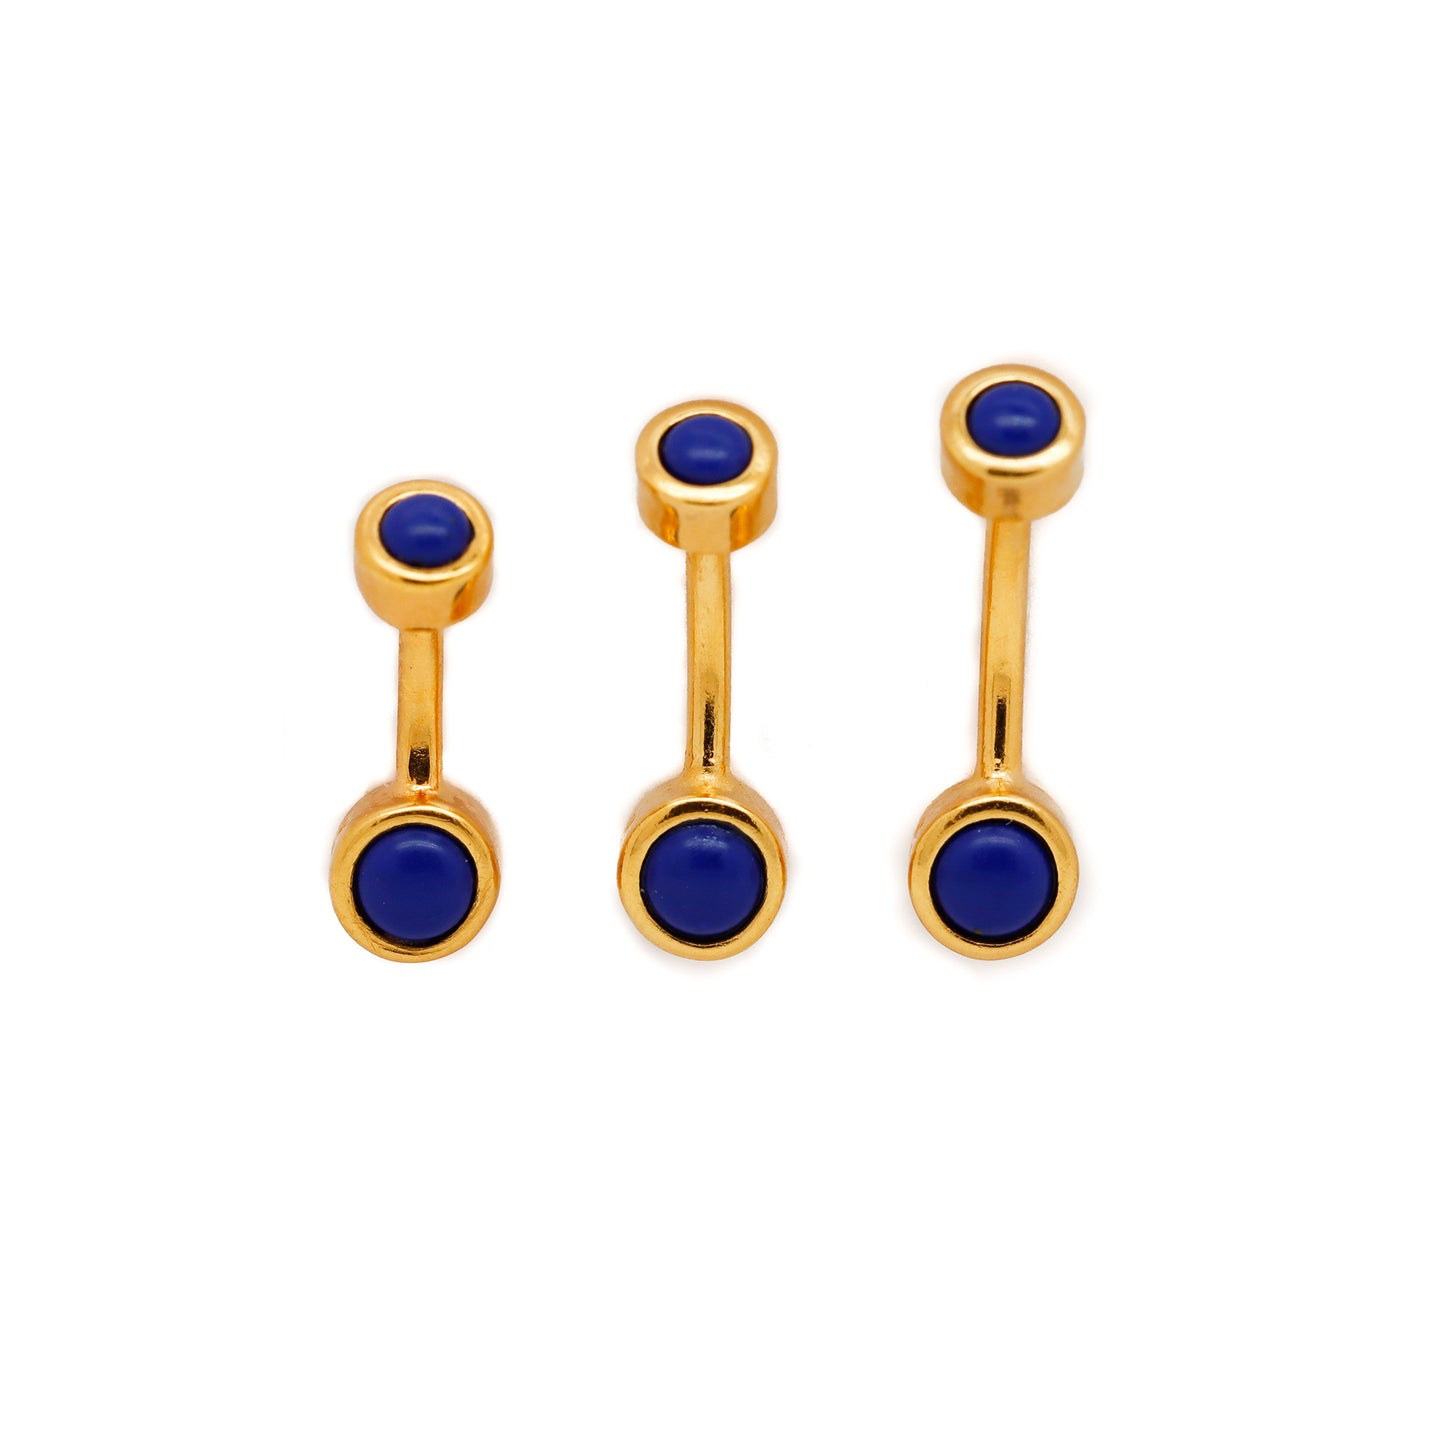 Vermeil | 24k Gold Coated 925 Silver 14G Tiny Lapis Lazuli Belly Ring | 6mm 1/4" 8mm 5/16" 10mm 3/8" - Sturdy South